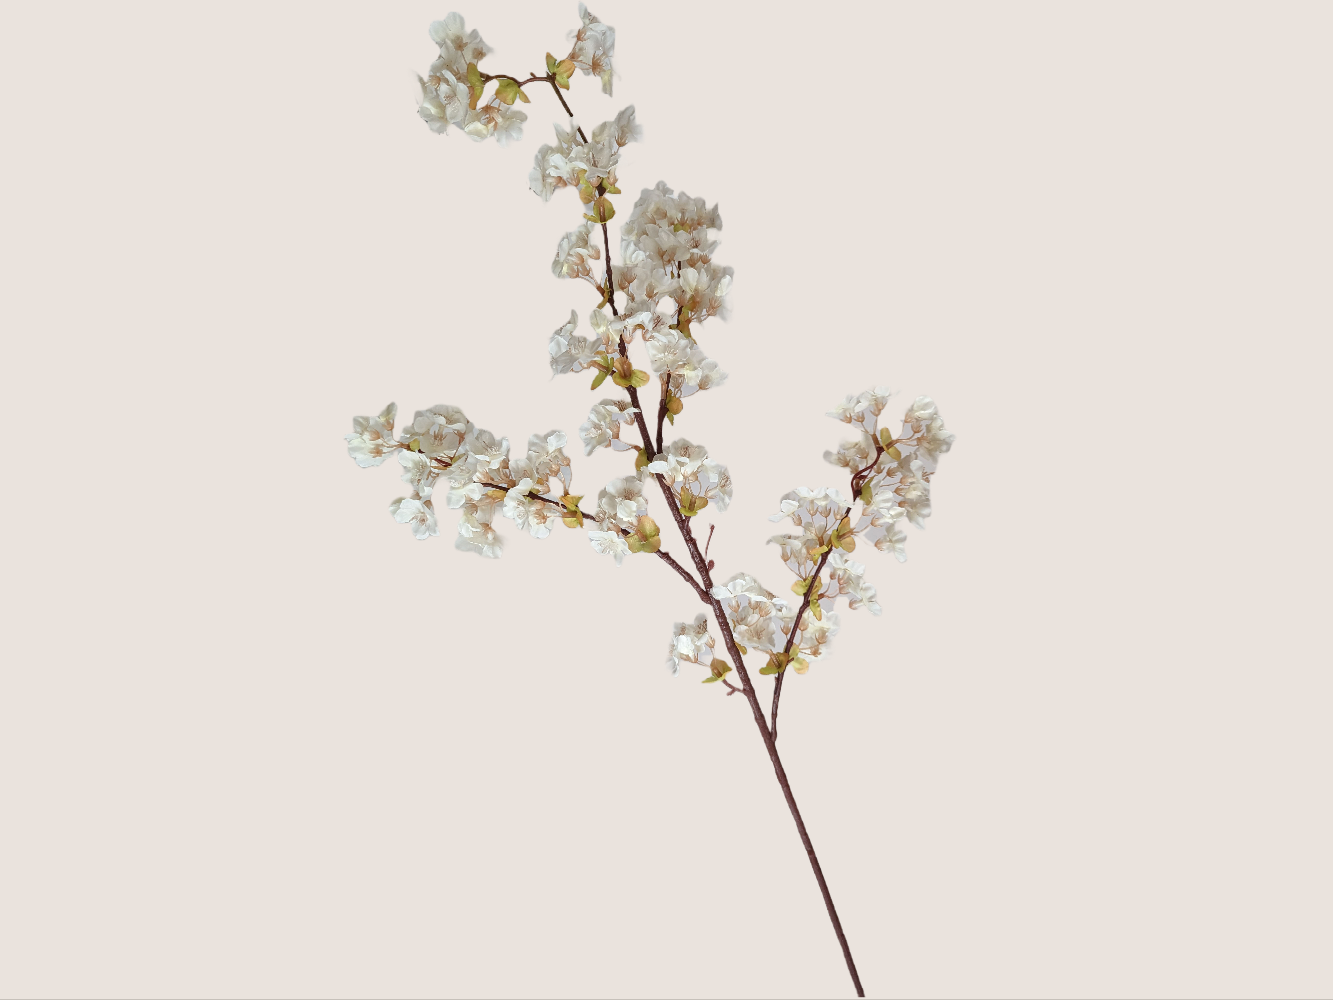 Cream-colored cherry blossom stem against a beige background. The 40-inch stem features three branches with light green buds and brown lifelike stems. Mauve and pink stamens add to the realistic appearance of the artificial flowers.